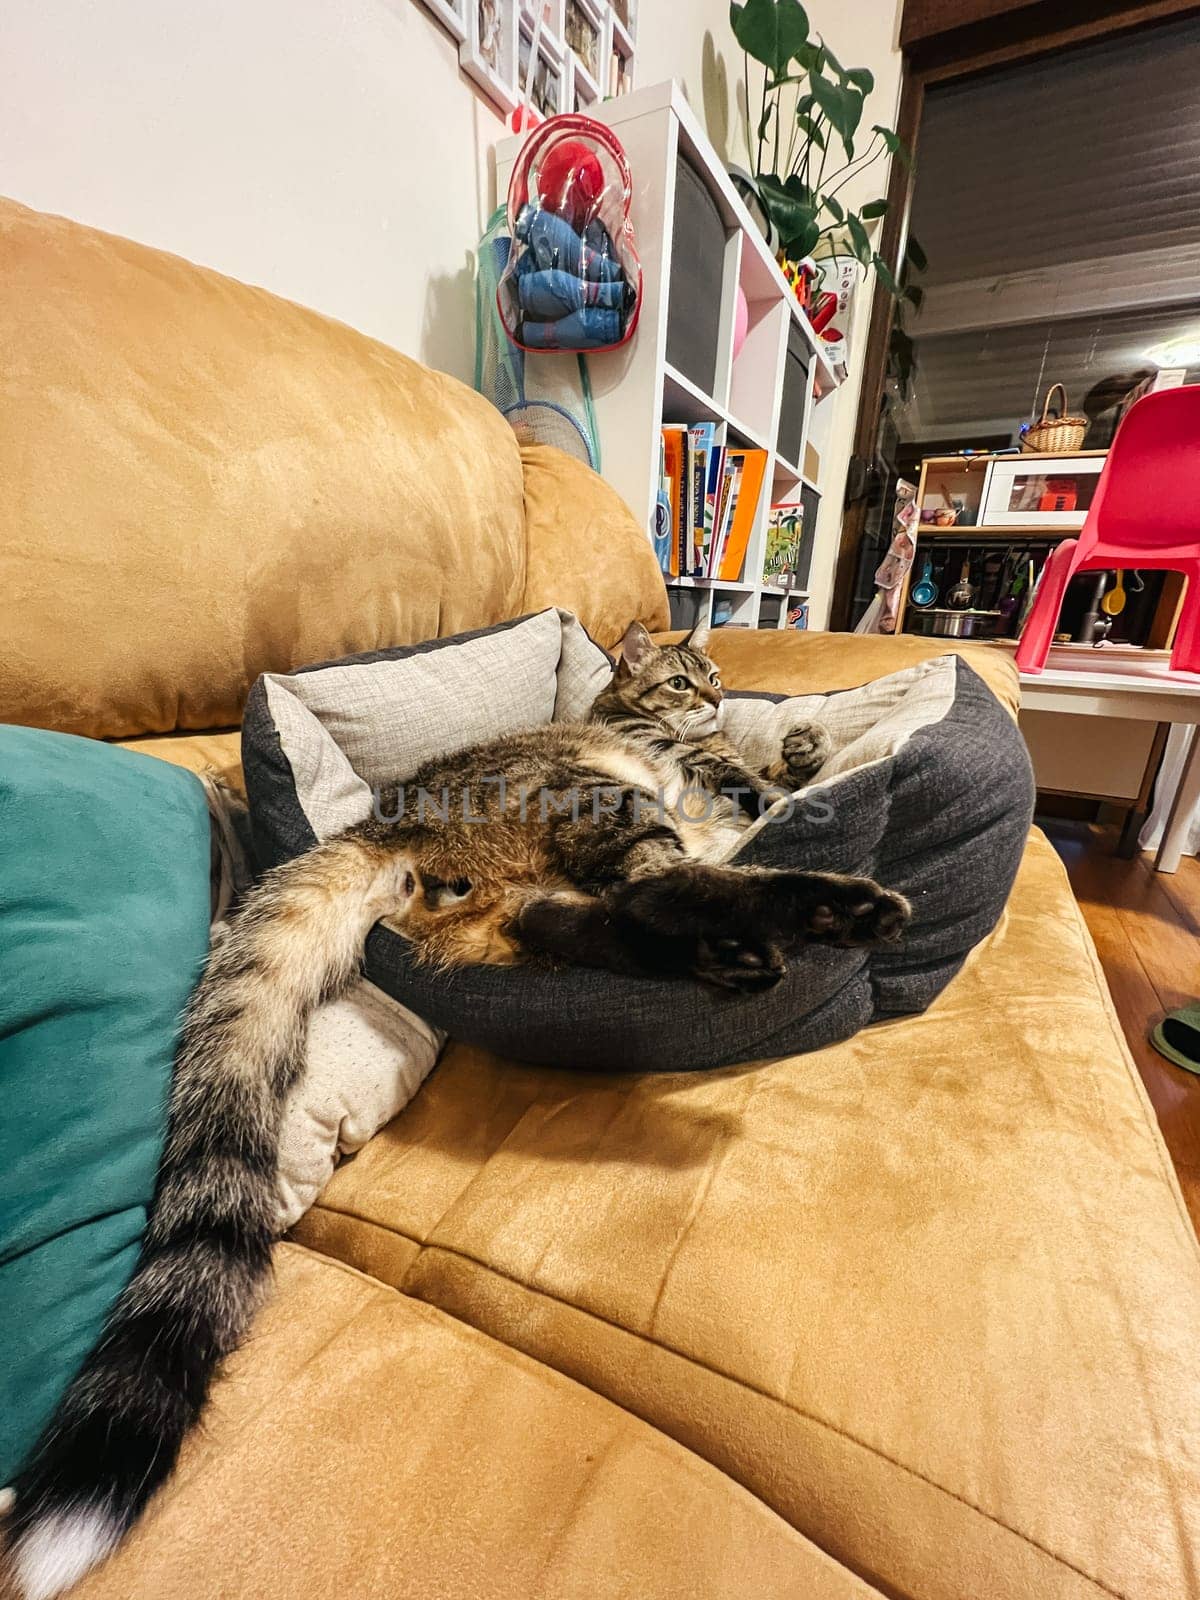 Tabby cat lies on a soft bed on the sofa by Nadtochiy